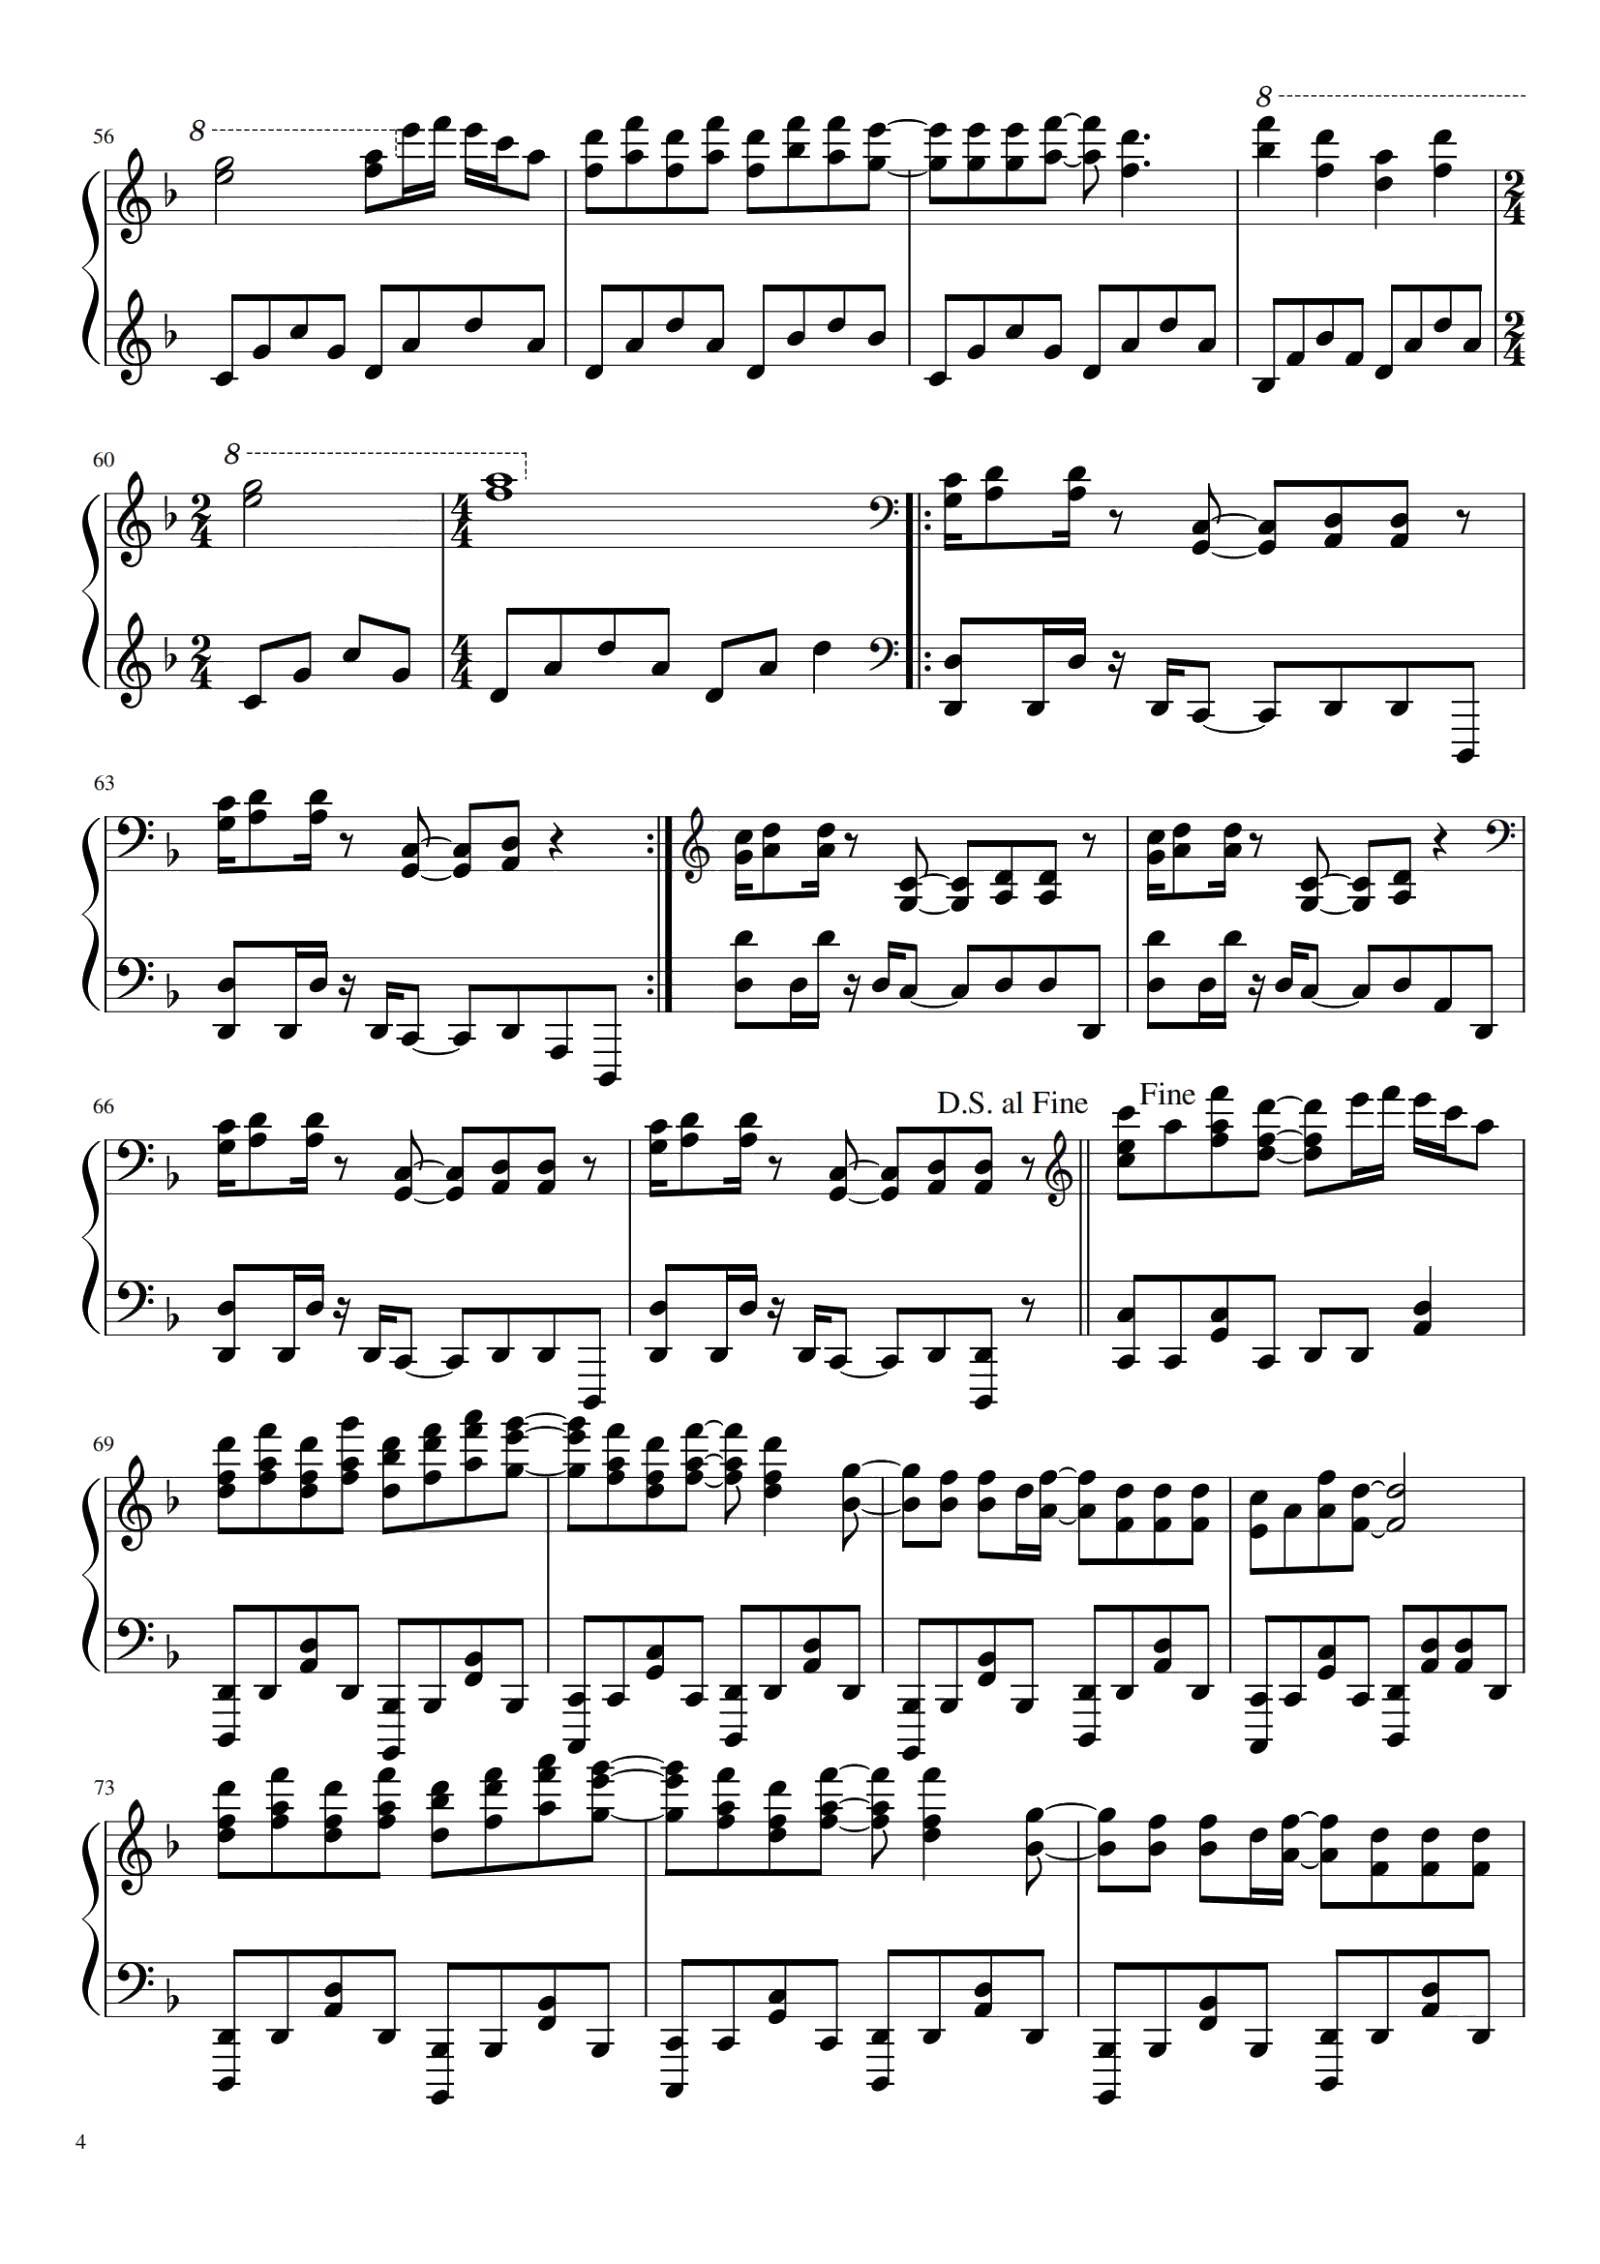 Alice Cooper "Gimme" Guitar and Bass sheet music | Jellynote